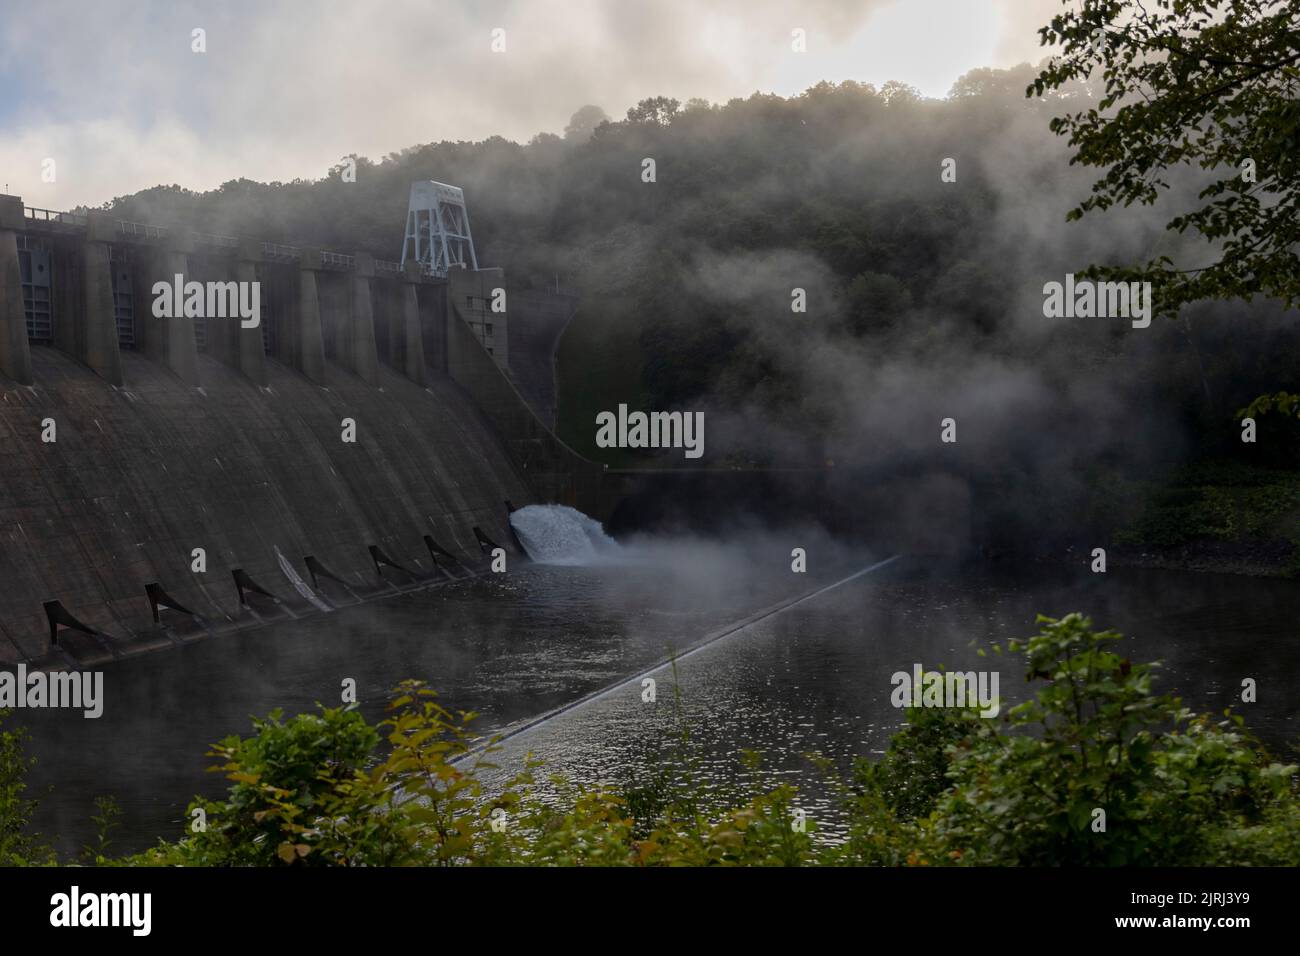 Fog lifts in morning downstream from the Conemaugh River Lake in Saltsburg, Pennsylvania, Aug. 13, 2022. The U.S. Army Corps of Engineers Pittsburgh District operates the reservoir to provide flood risk reduction to the Conemaugh, Kiskiminetas, lower Allegheny and upper Ohio River valleys. Recreationally, Conemaugh River Lake provides residents and visitors with biking and hiking trails, fishing and picnic areas. Stock Photo